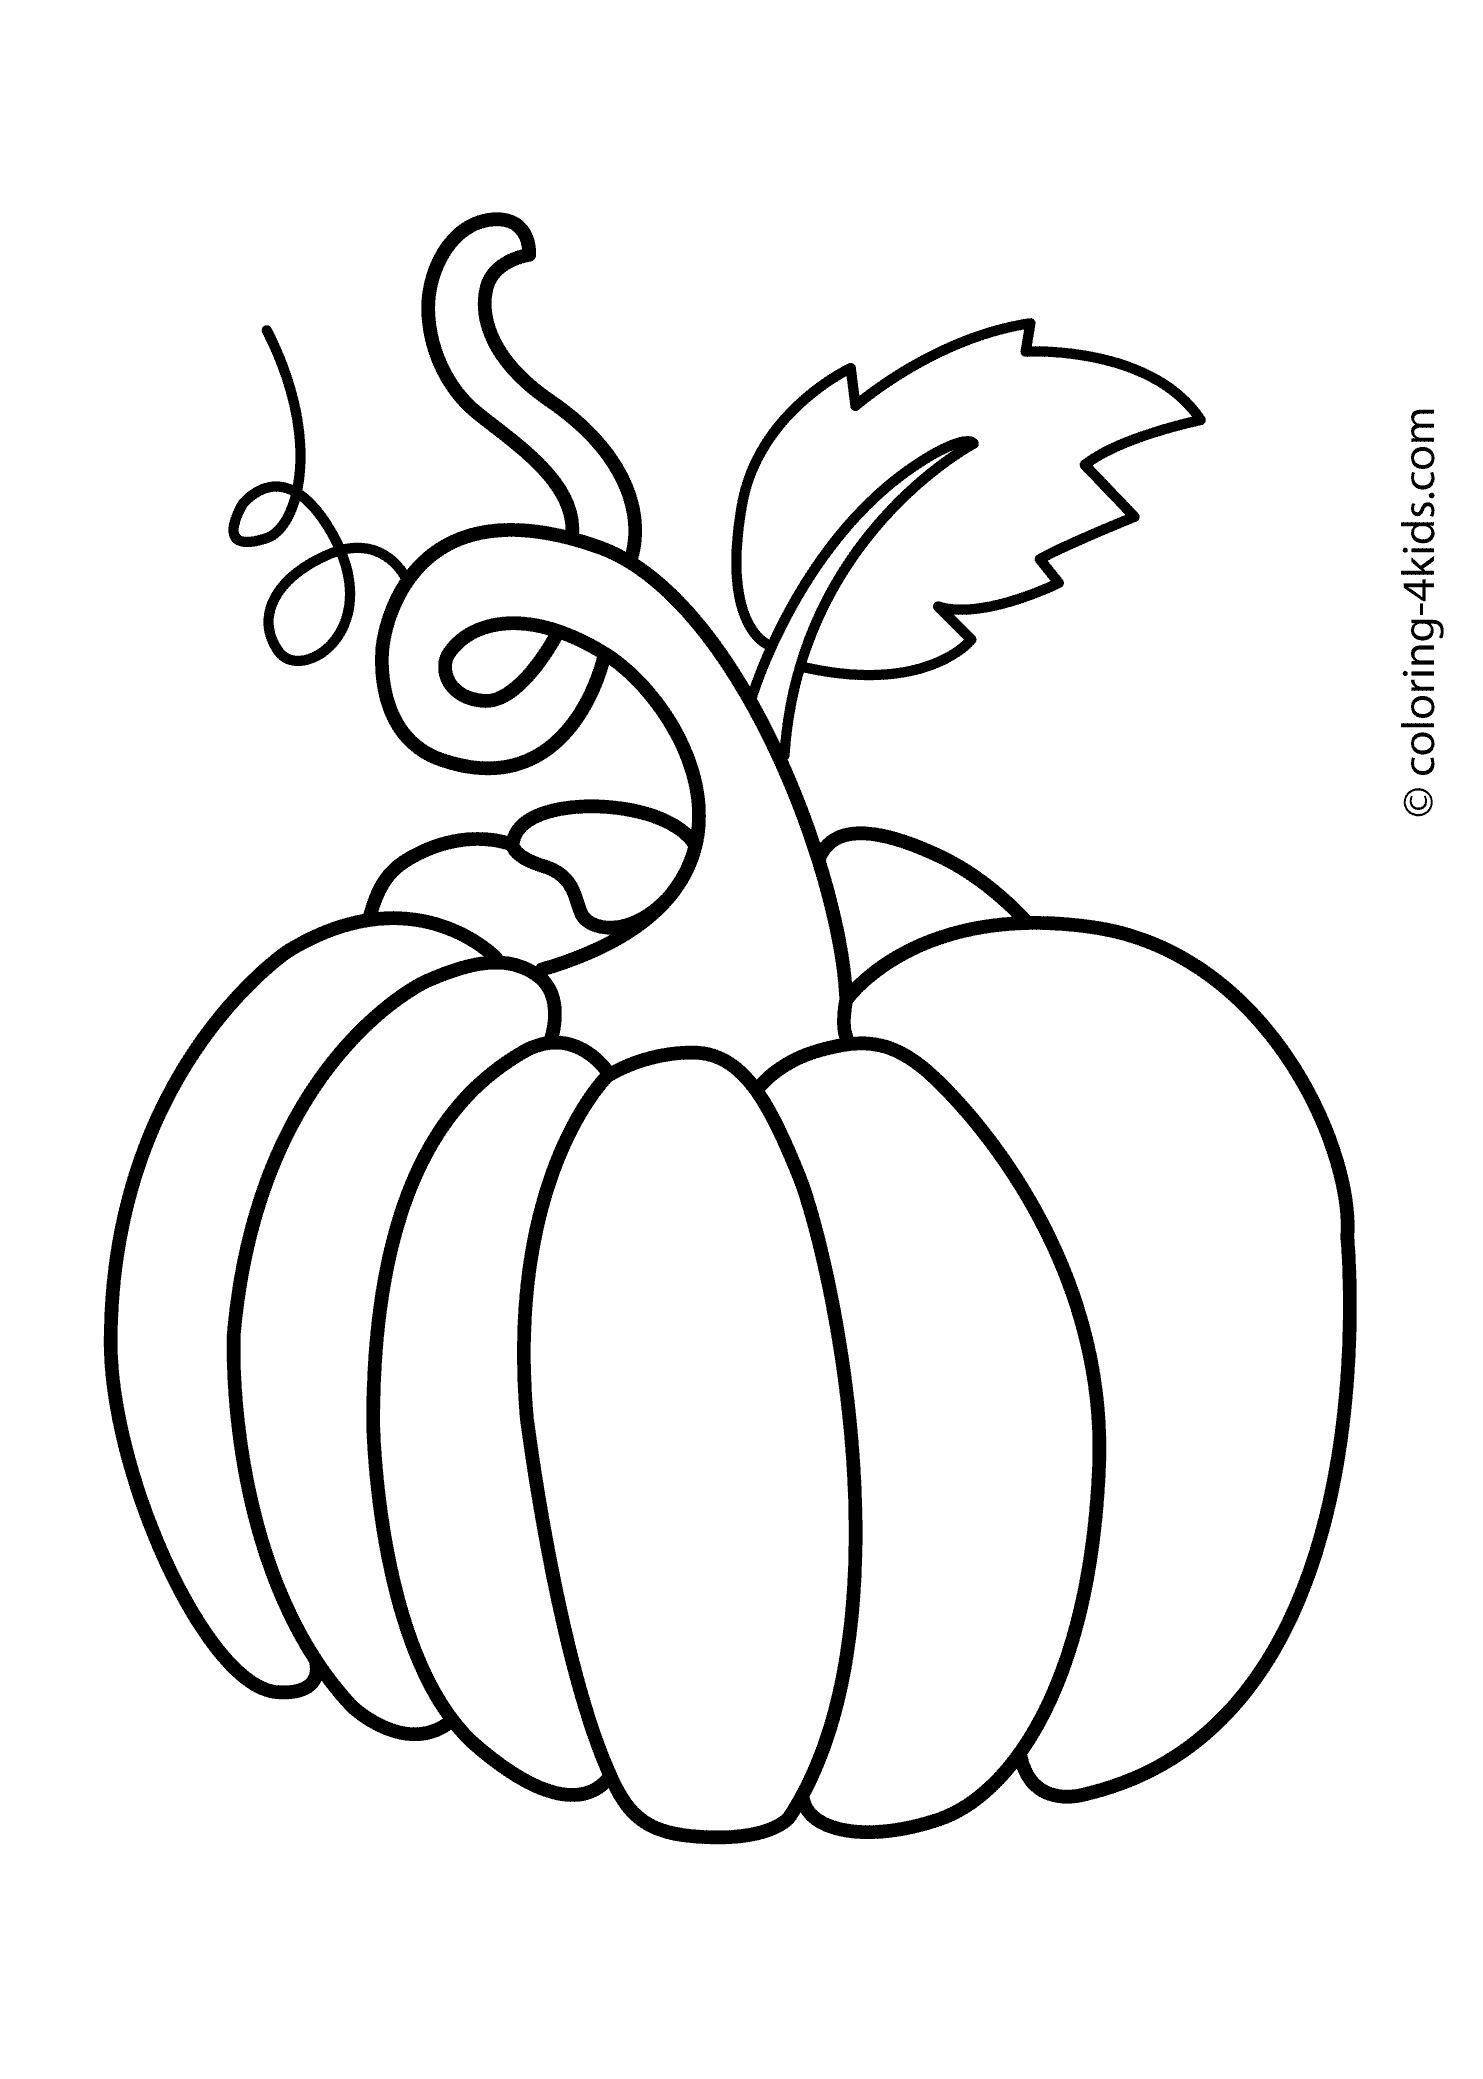 Vegetables Coloring Page Vegetable Coloring Pages Free Download Best Vegetable Coloring